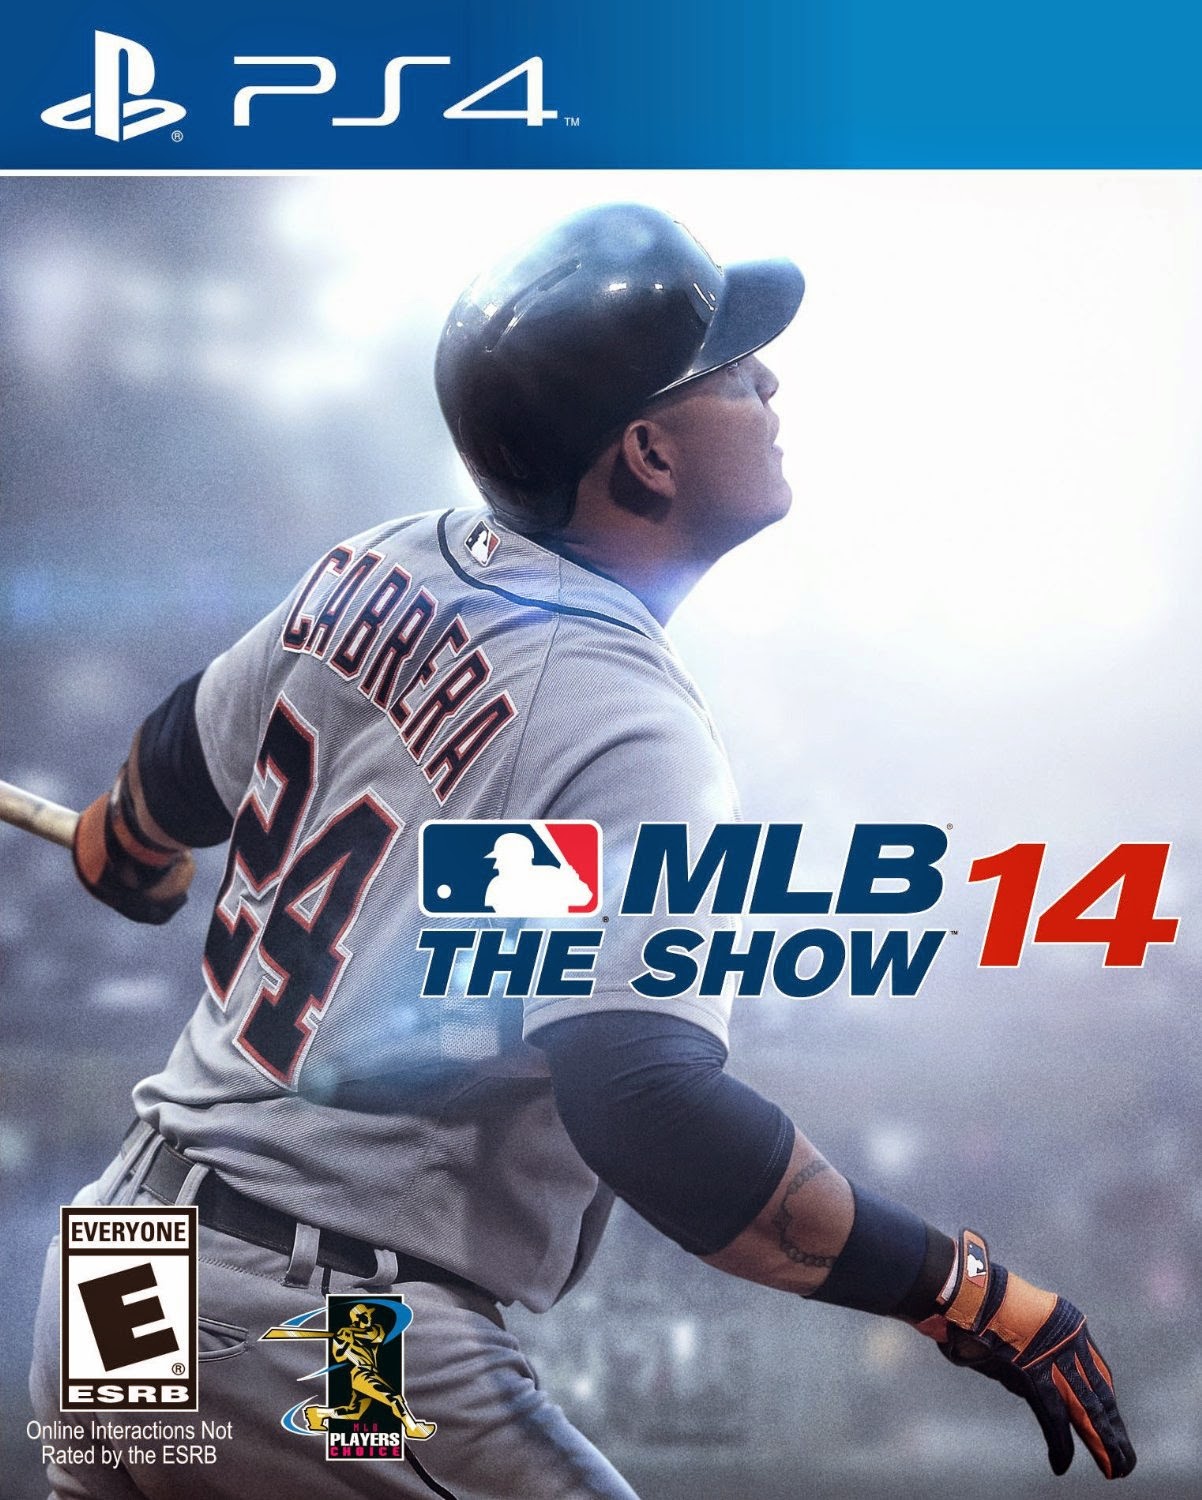 MLB-14-The-Show-Playstation-4-New-Trailer-Revealed